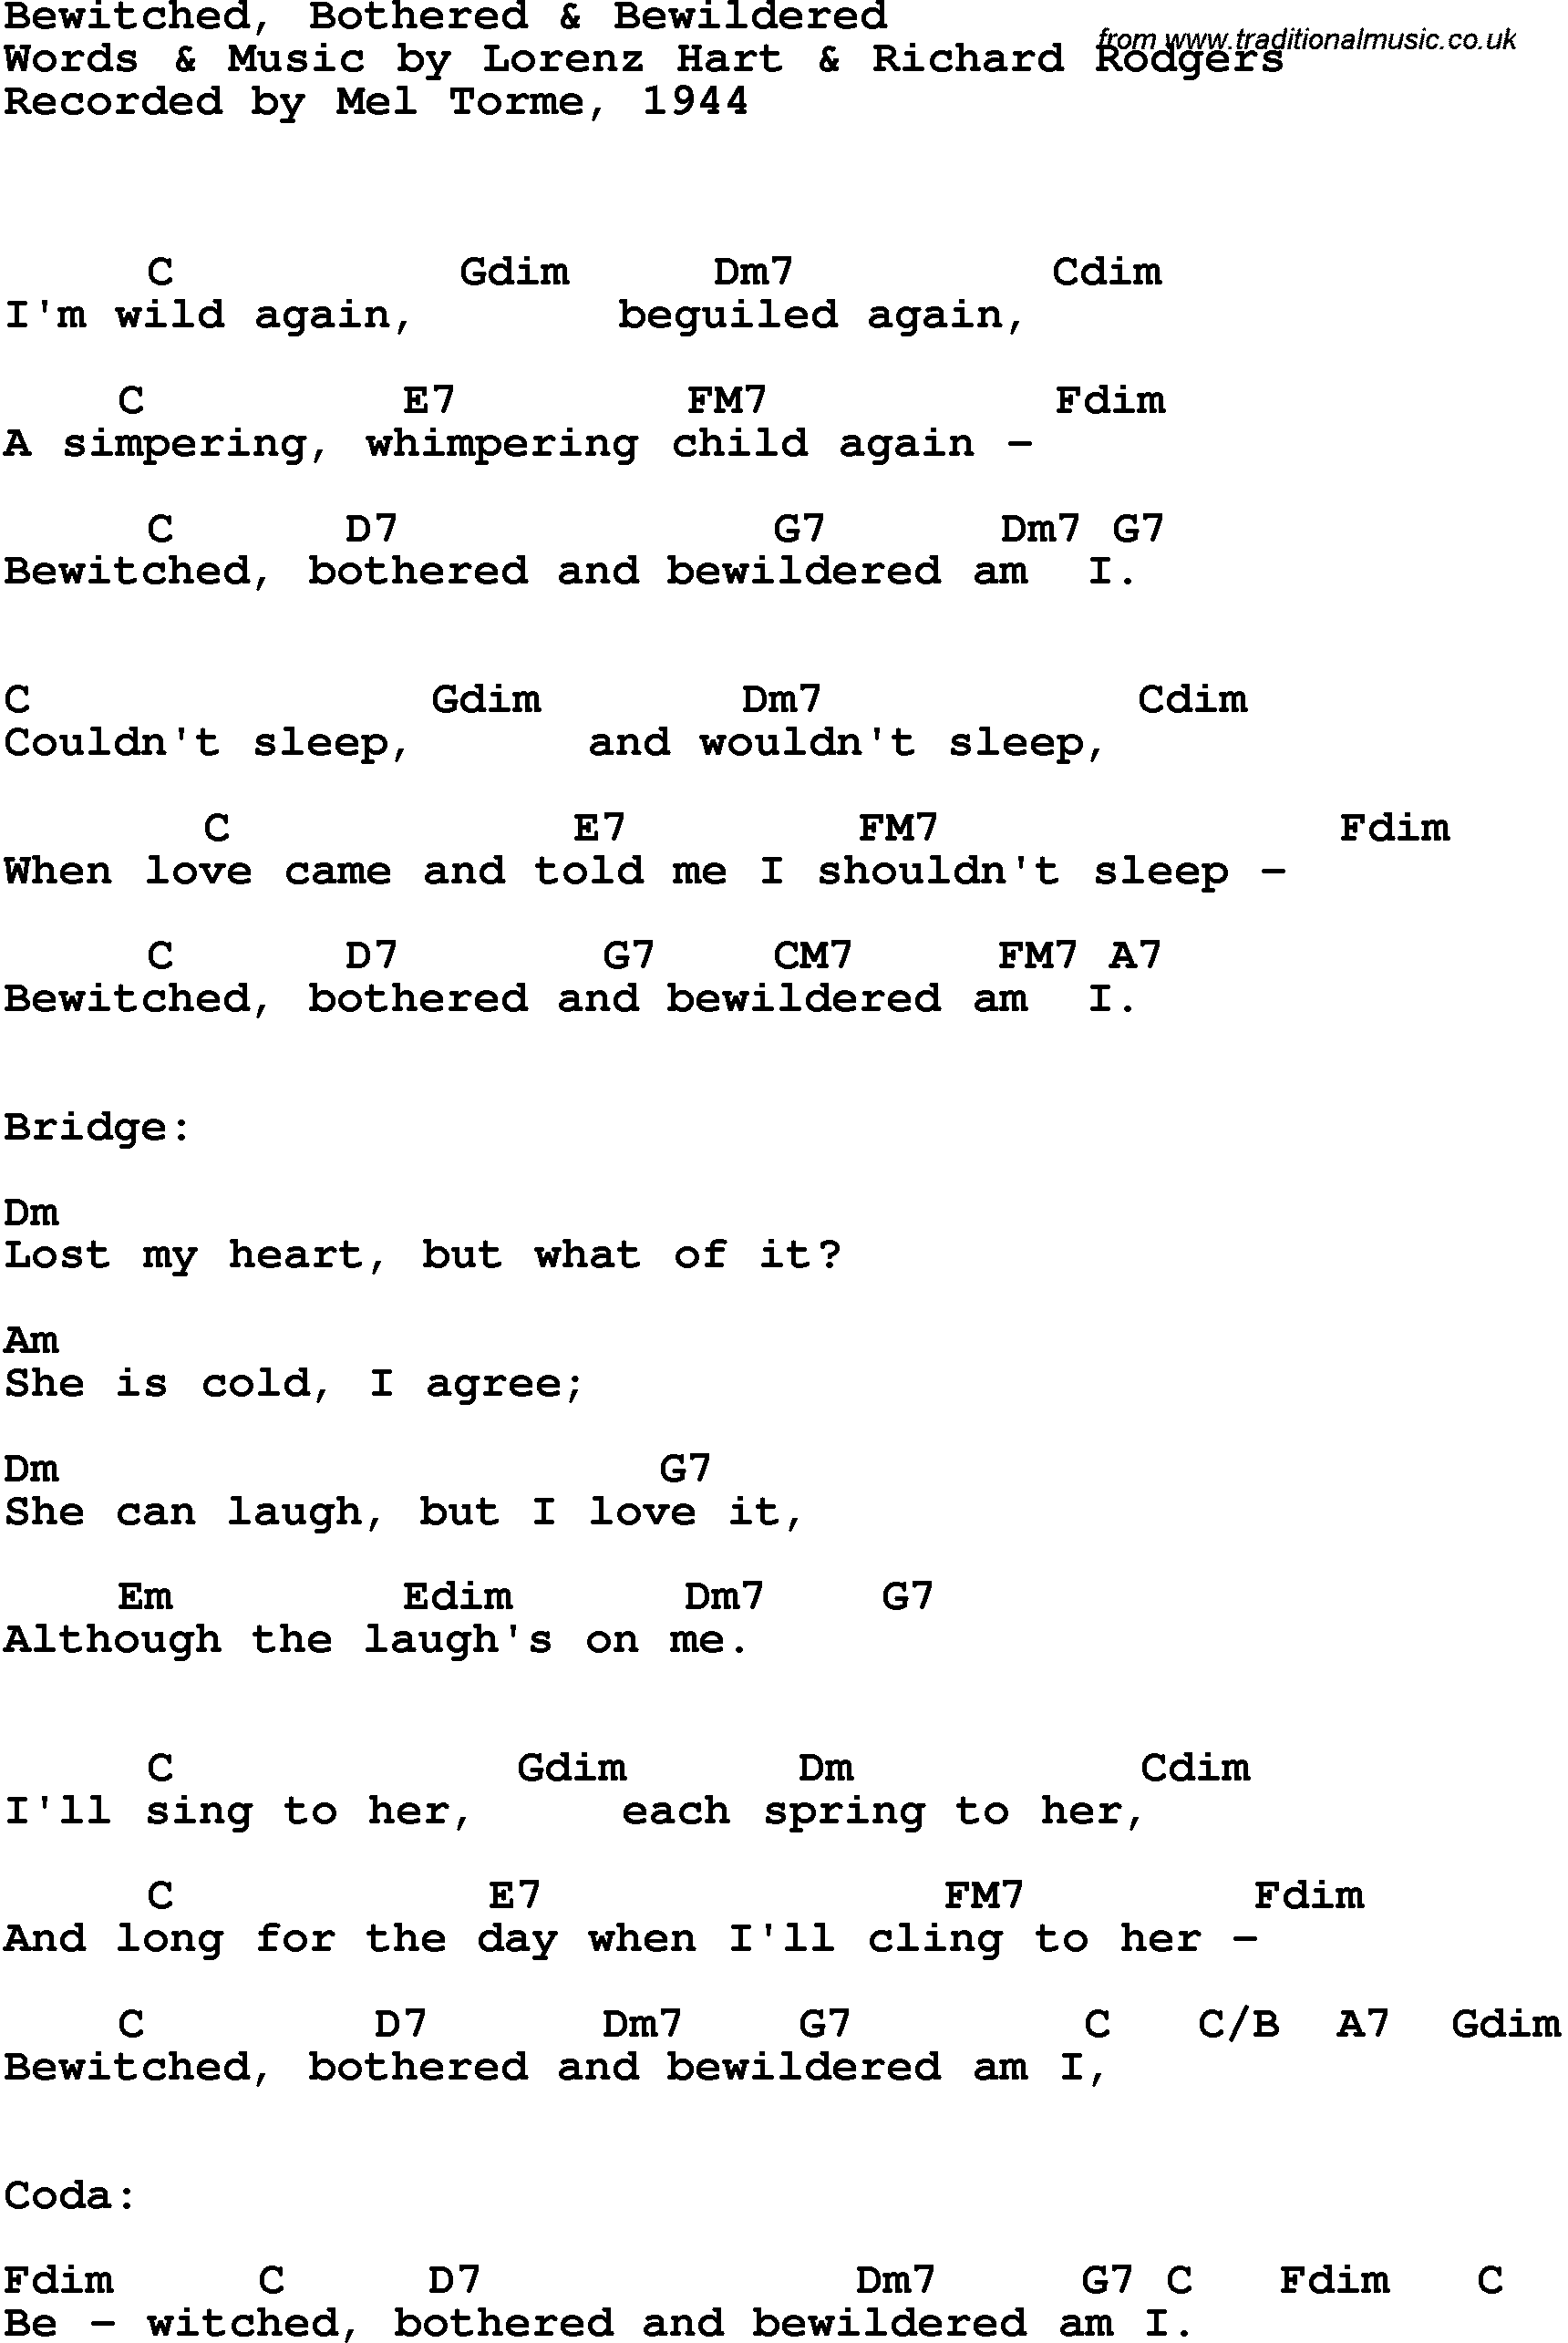 Song Lyrics with guitar chords for Bewitched, Bothered & Bewildered - Mel Torm�, 1944